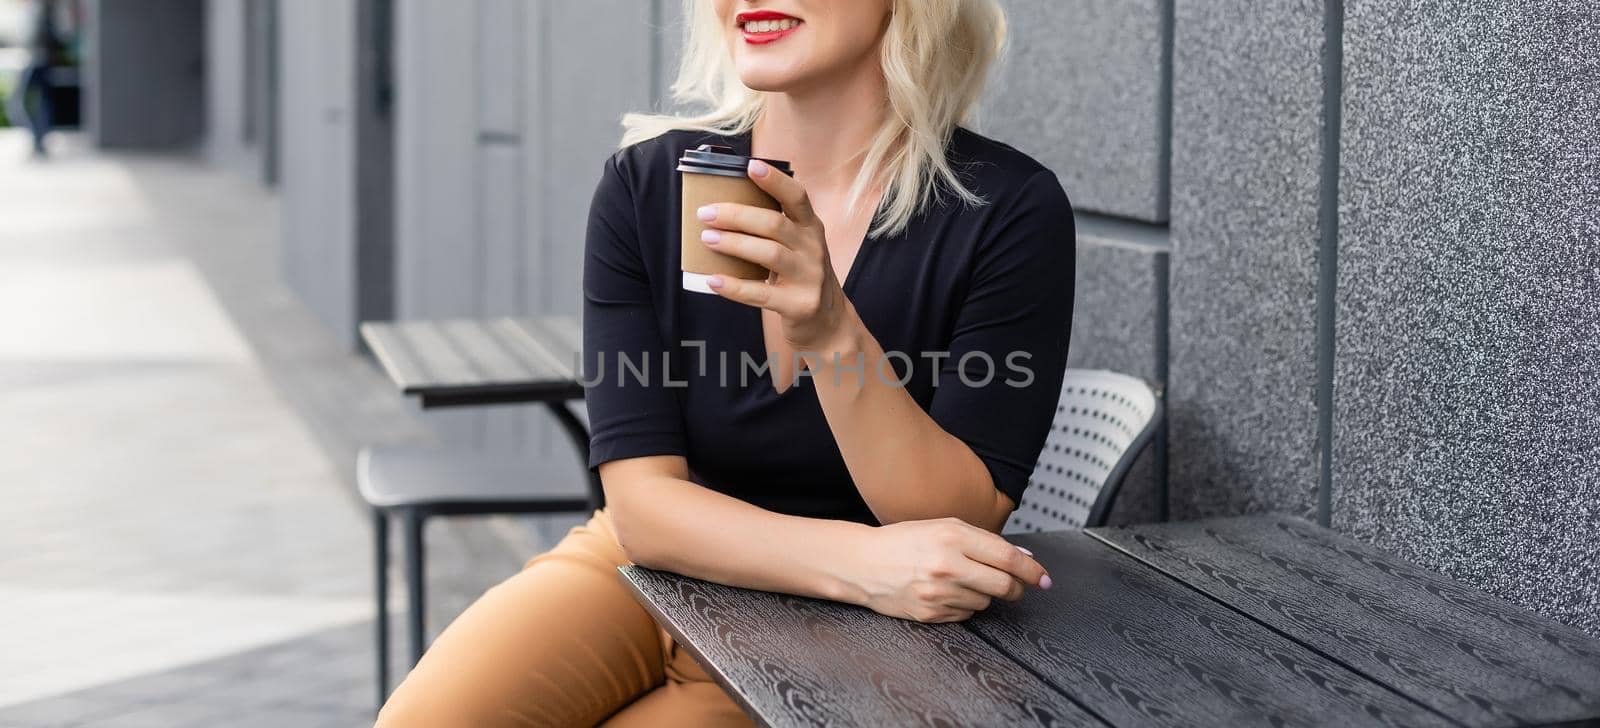 woman in a cafe drinking coffee.